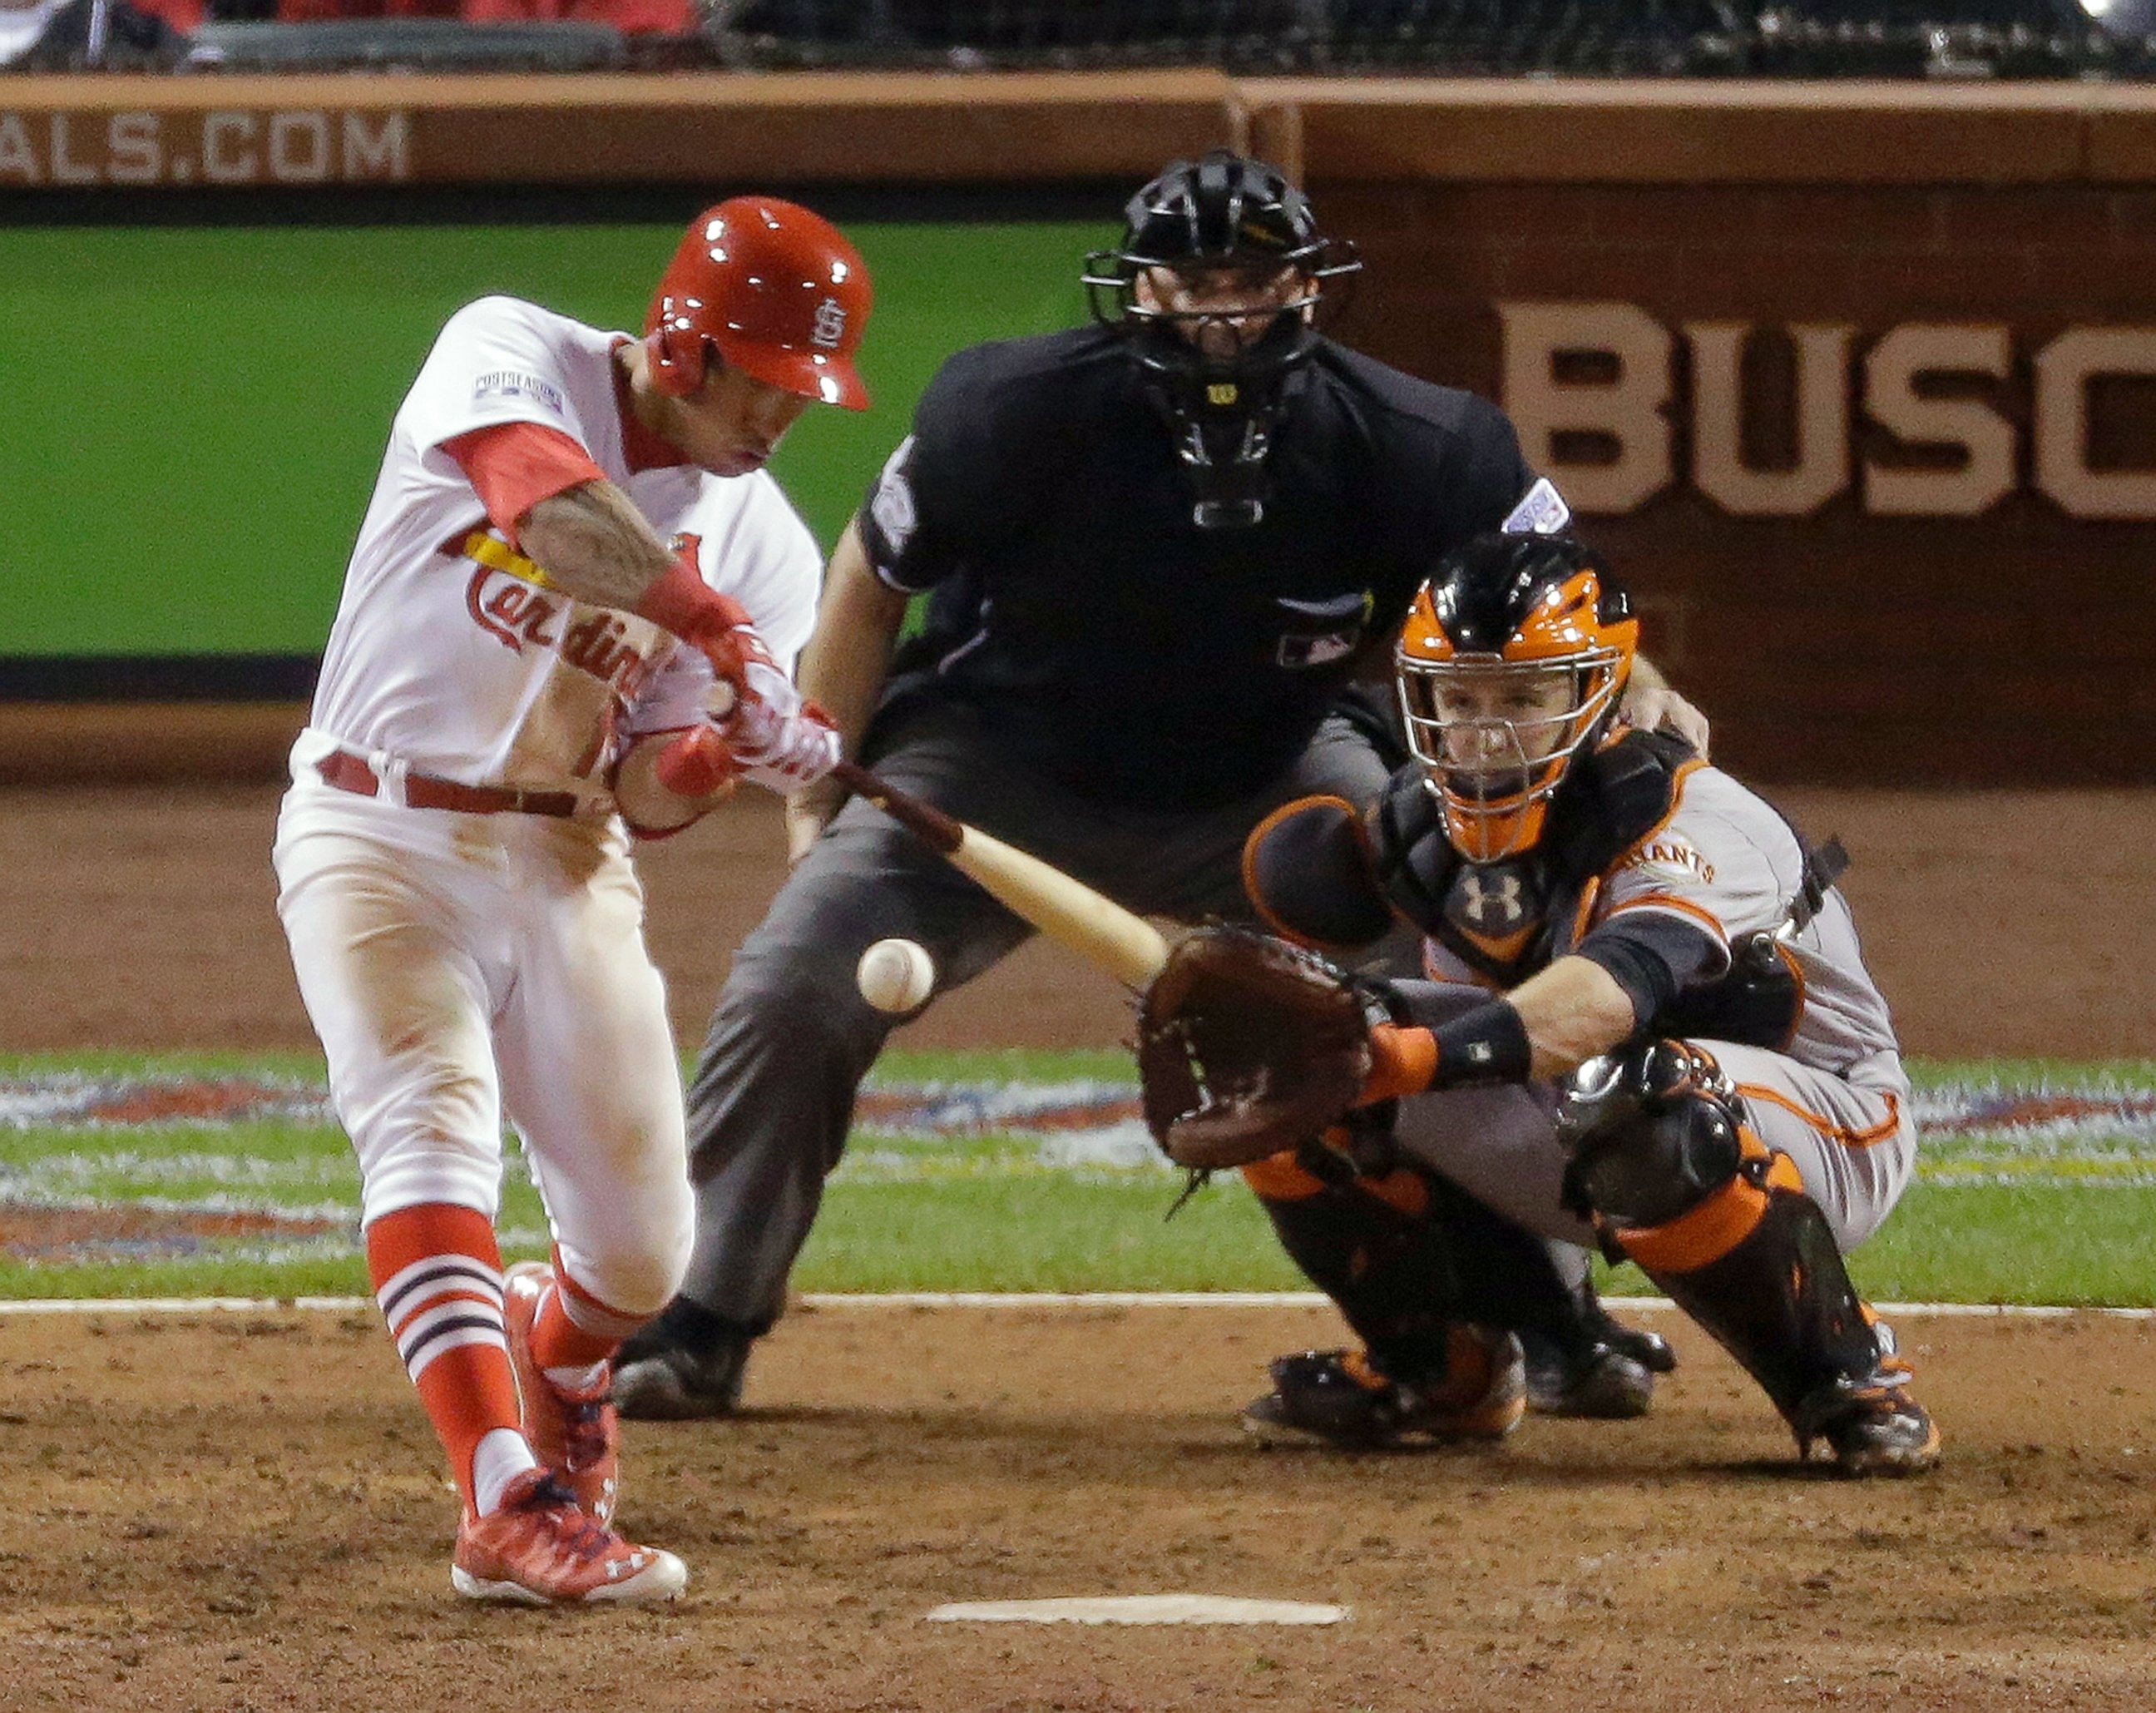 PHOTO: St. Louis Cardinals' Kolten Wong hits a walk off home run during the ninth inning in Game 2 of the National League baseball championship series against the San Francisco Giants, Oct. 12, 2014, in St. Louis.